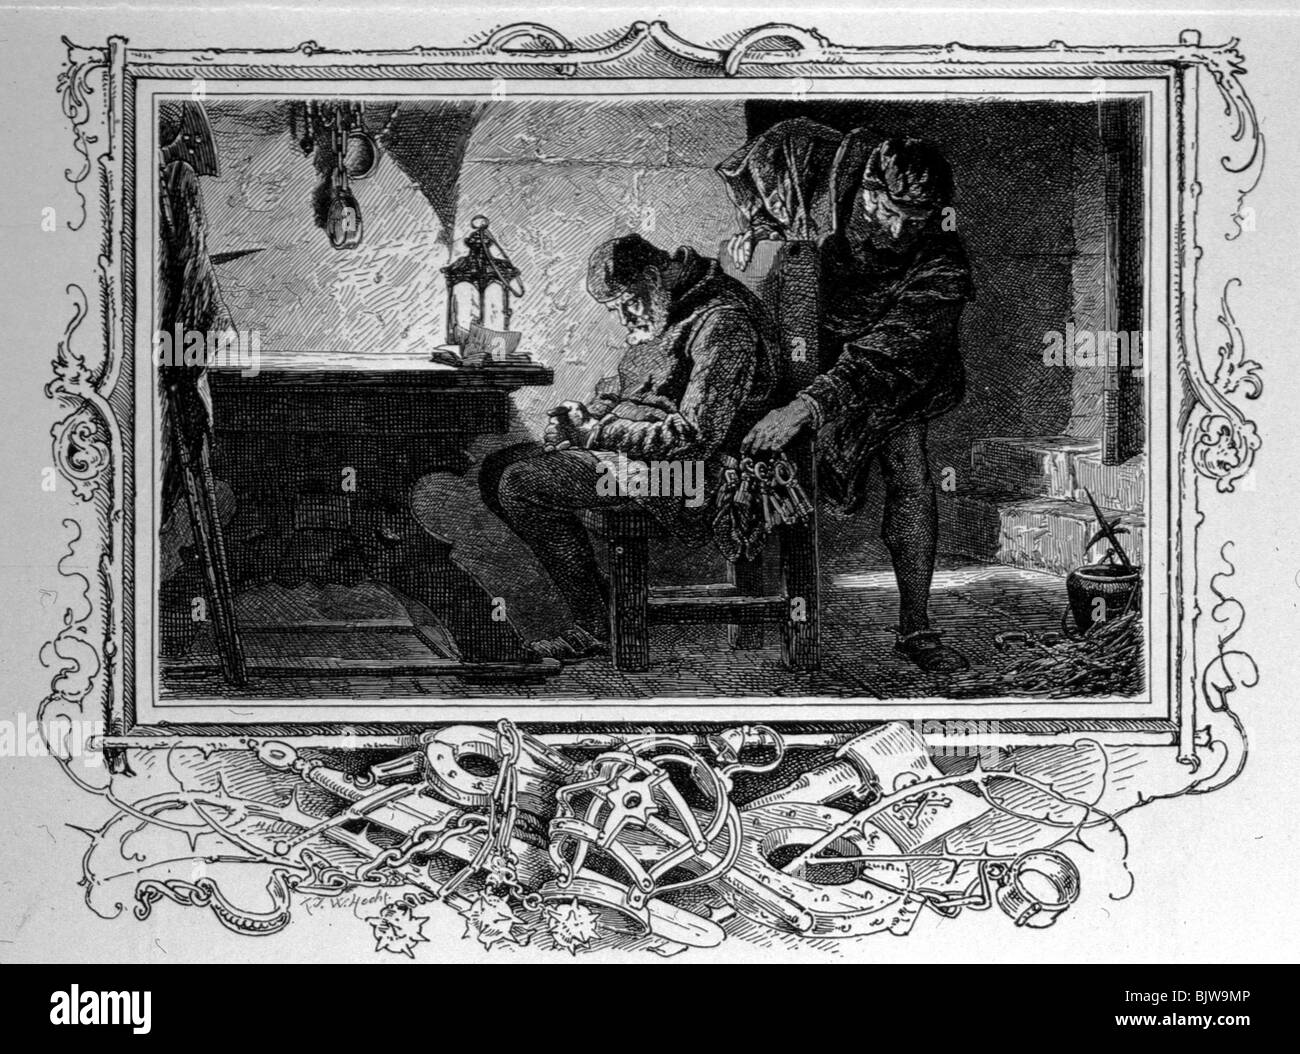 literature, 'Faust I', 25th scene 'dungeon', scene with Faust and guard, woodcut by W. Hecht, circa 1870, Stock Photo